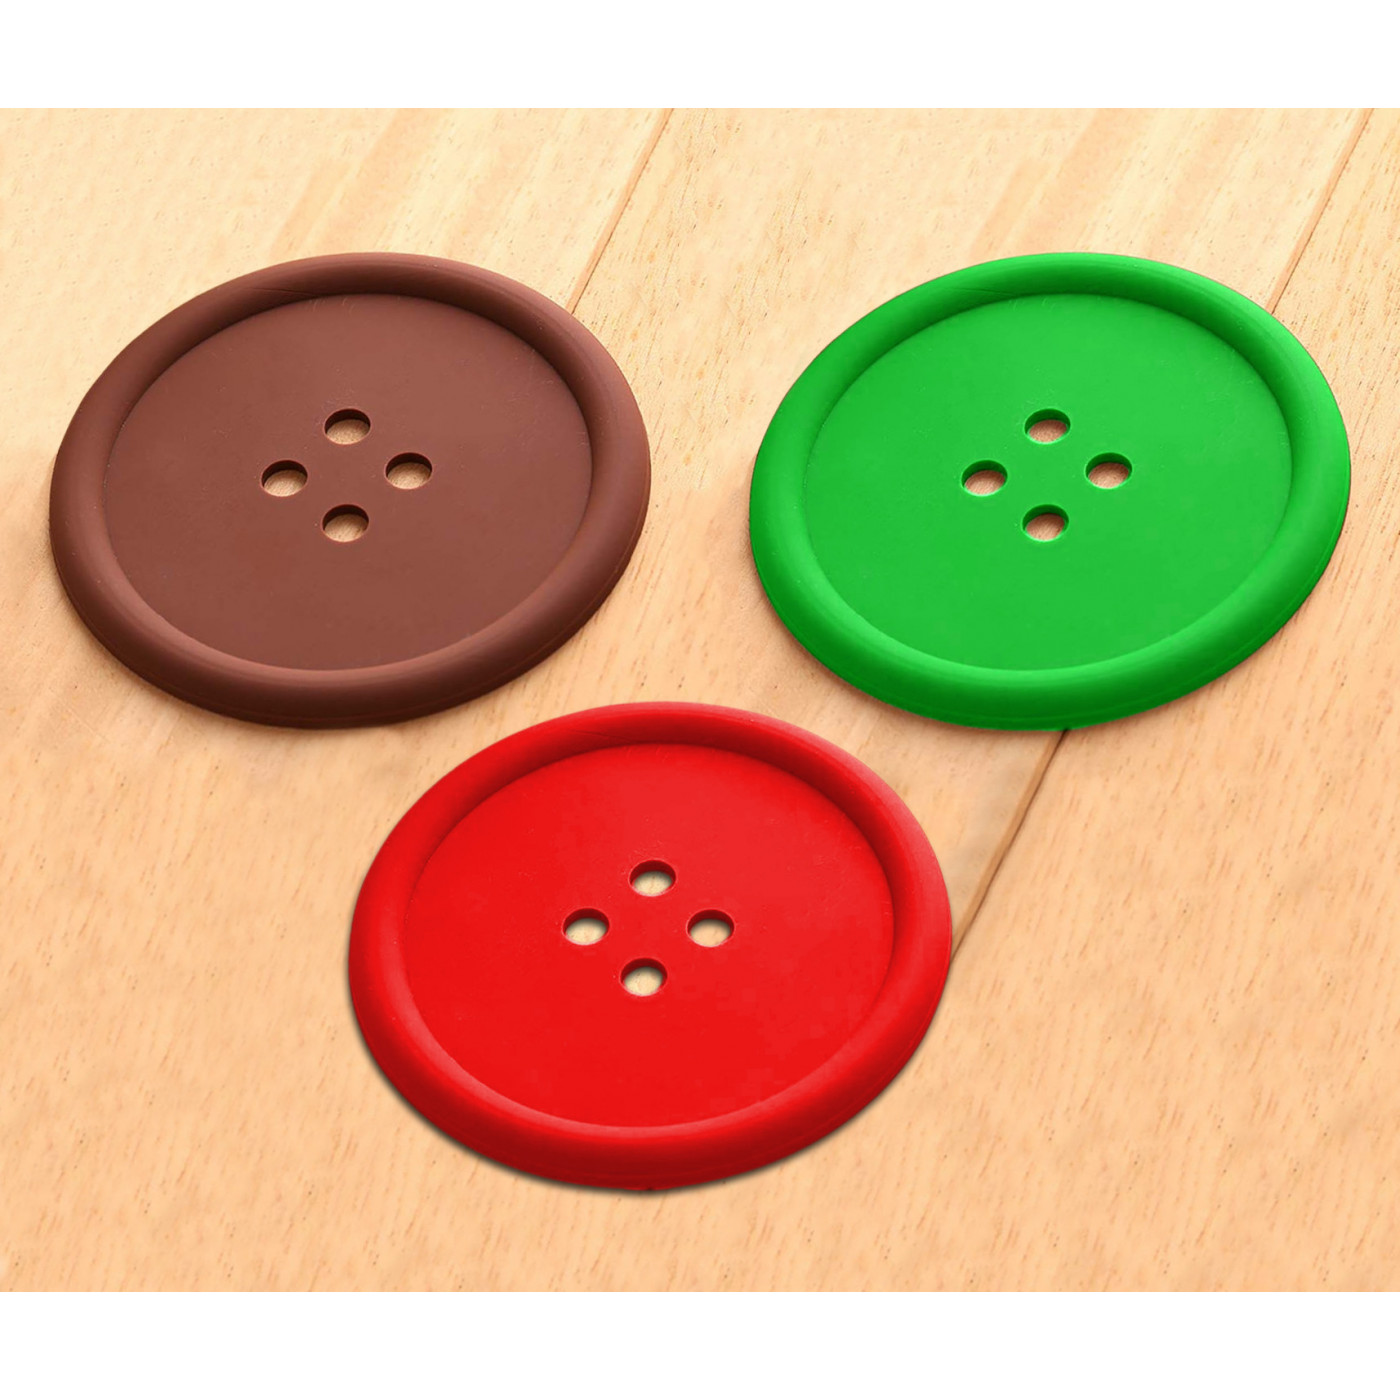 Set of 15 silicone coasters (red, green, brown)  - 1